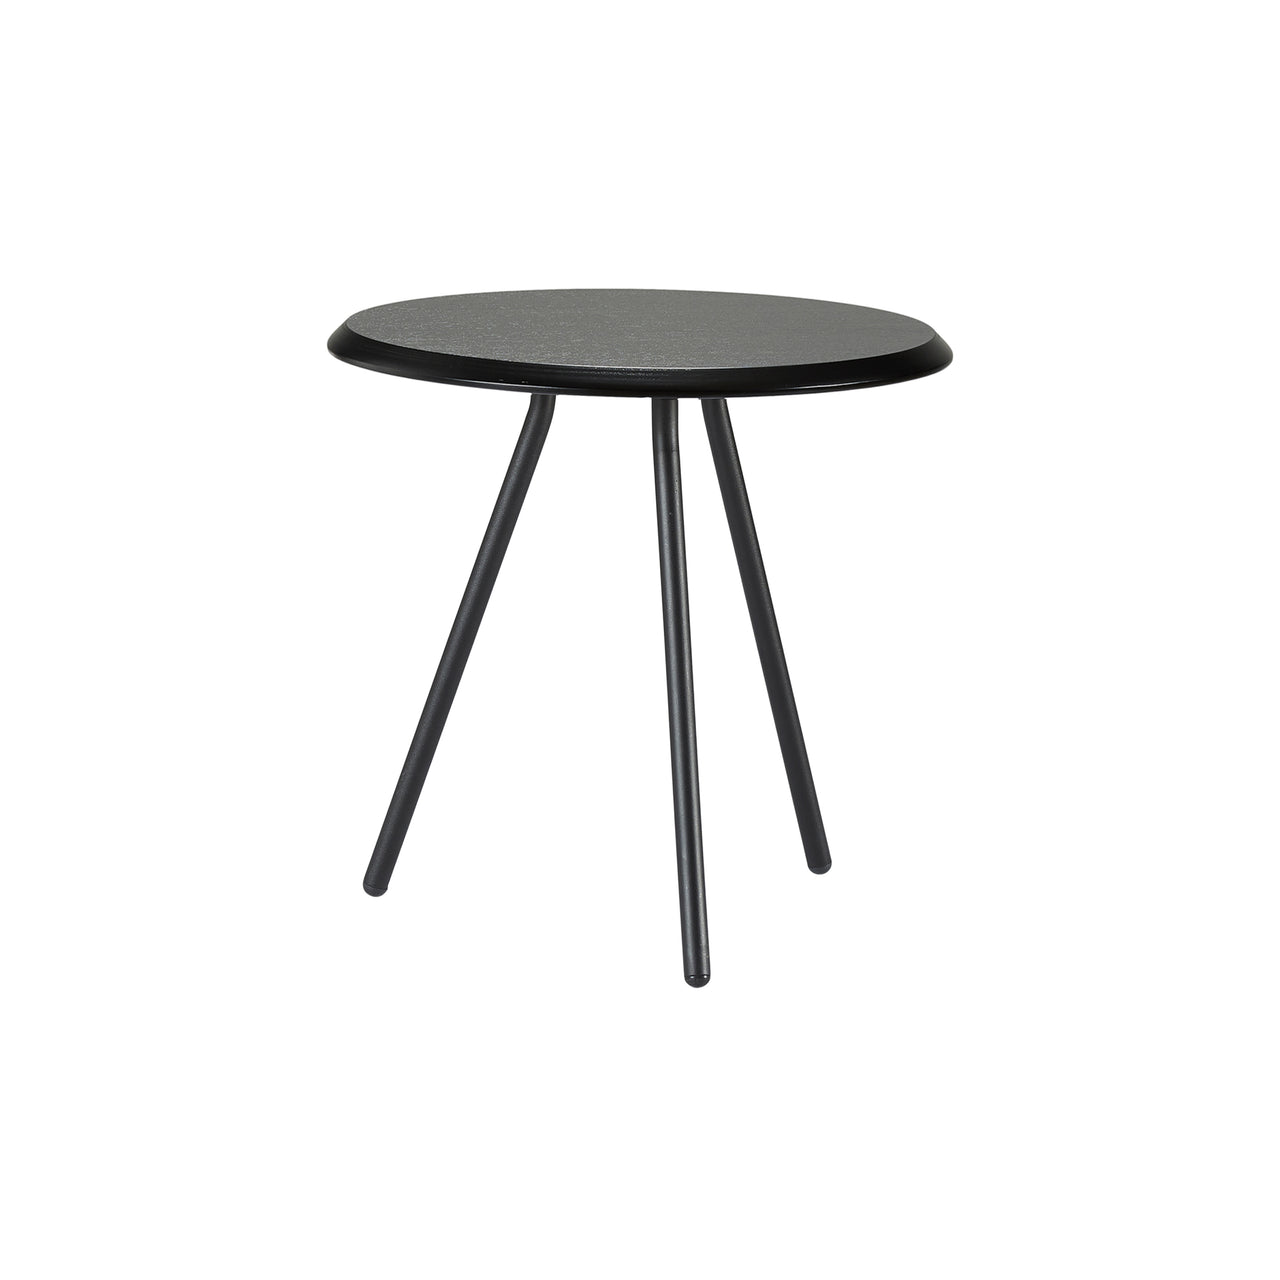 Soround Side Table: Low + Black Painted Ash